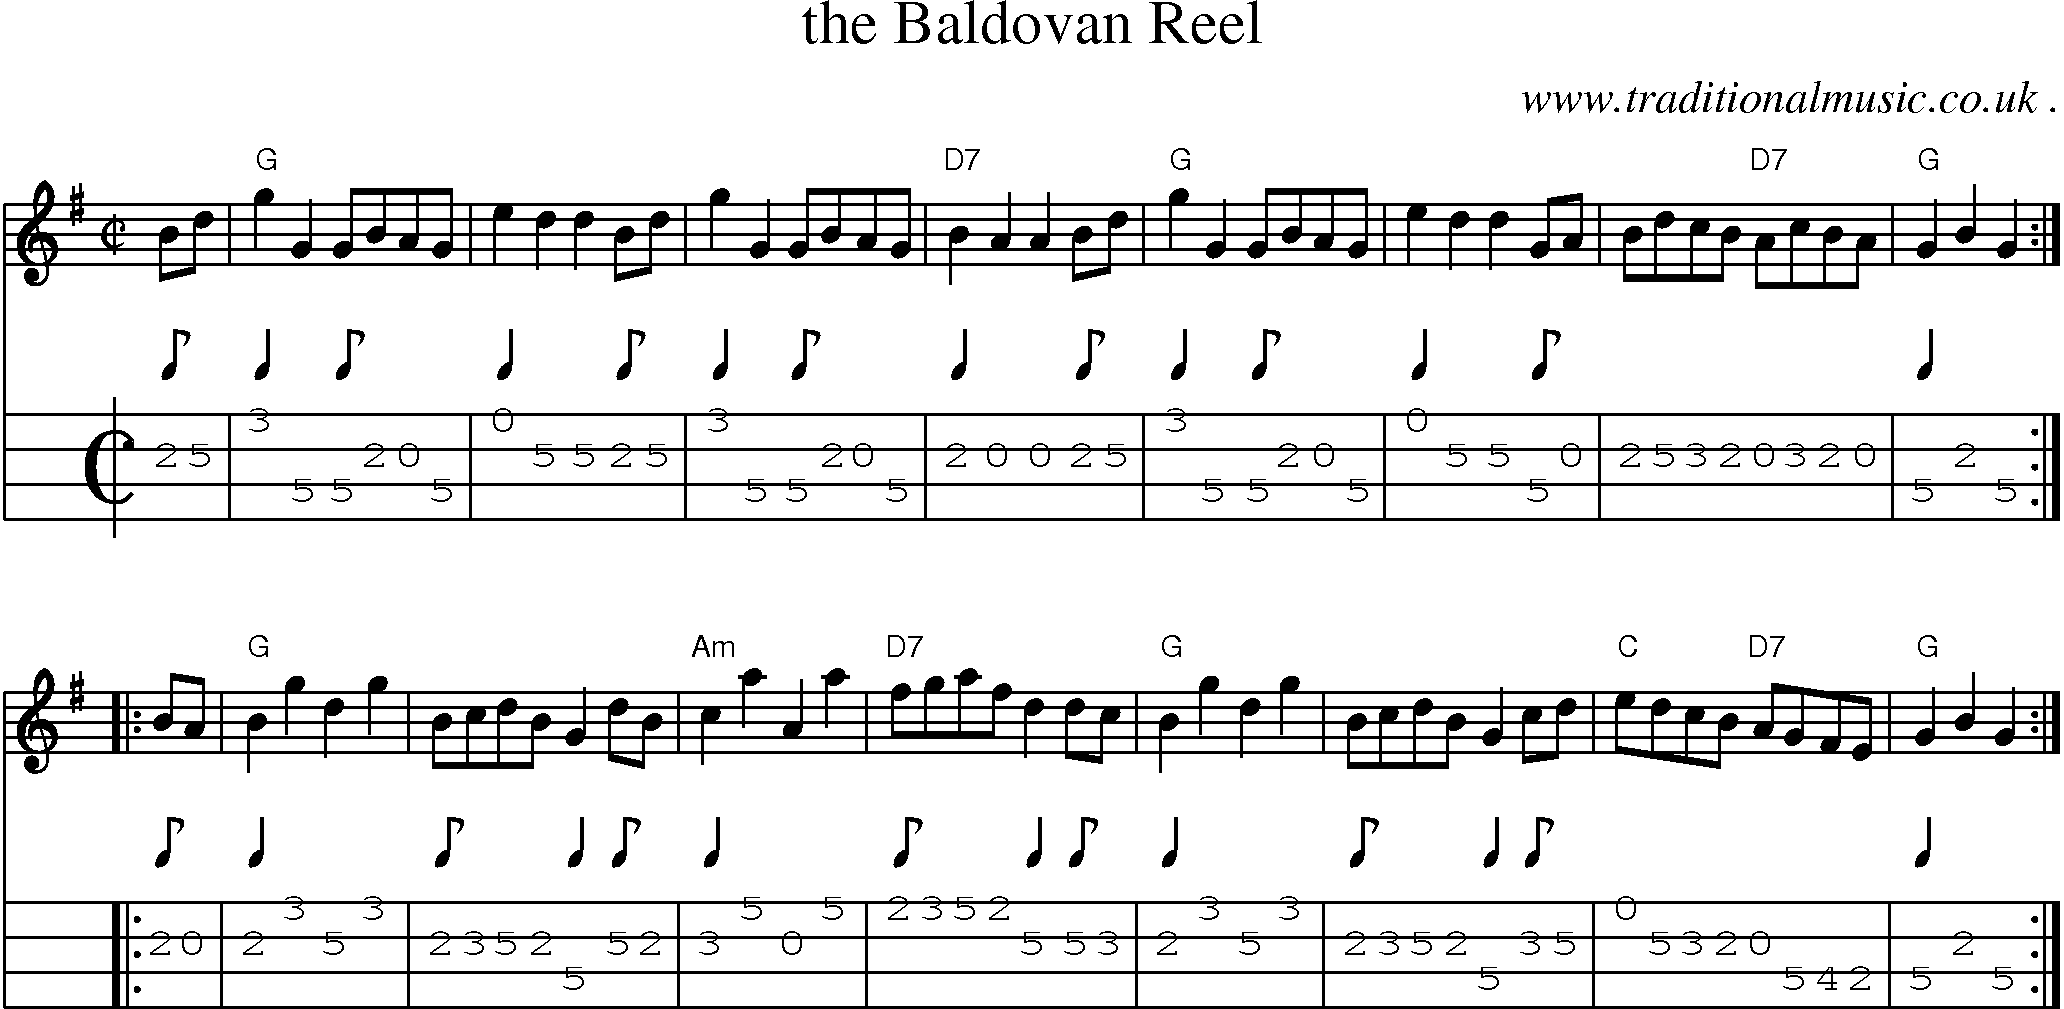 Sheet-music  score, Chords and Mandolin Tabs for The Baldovan Reel